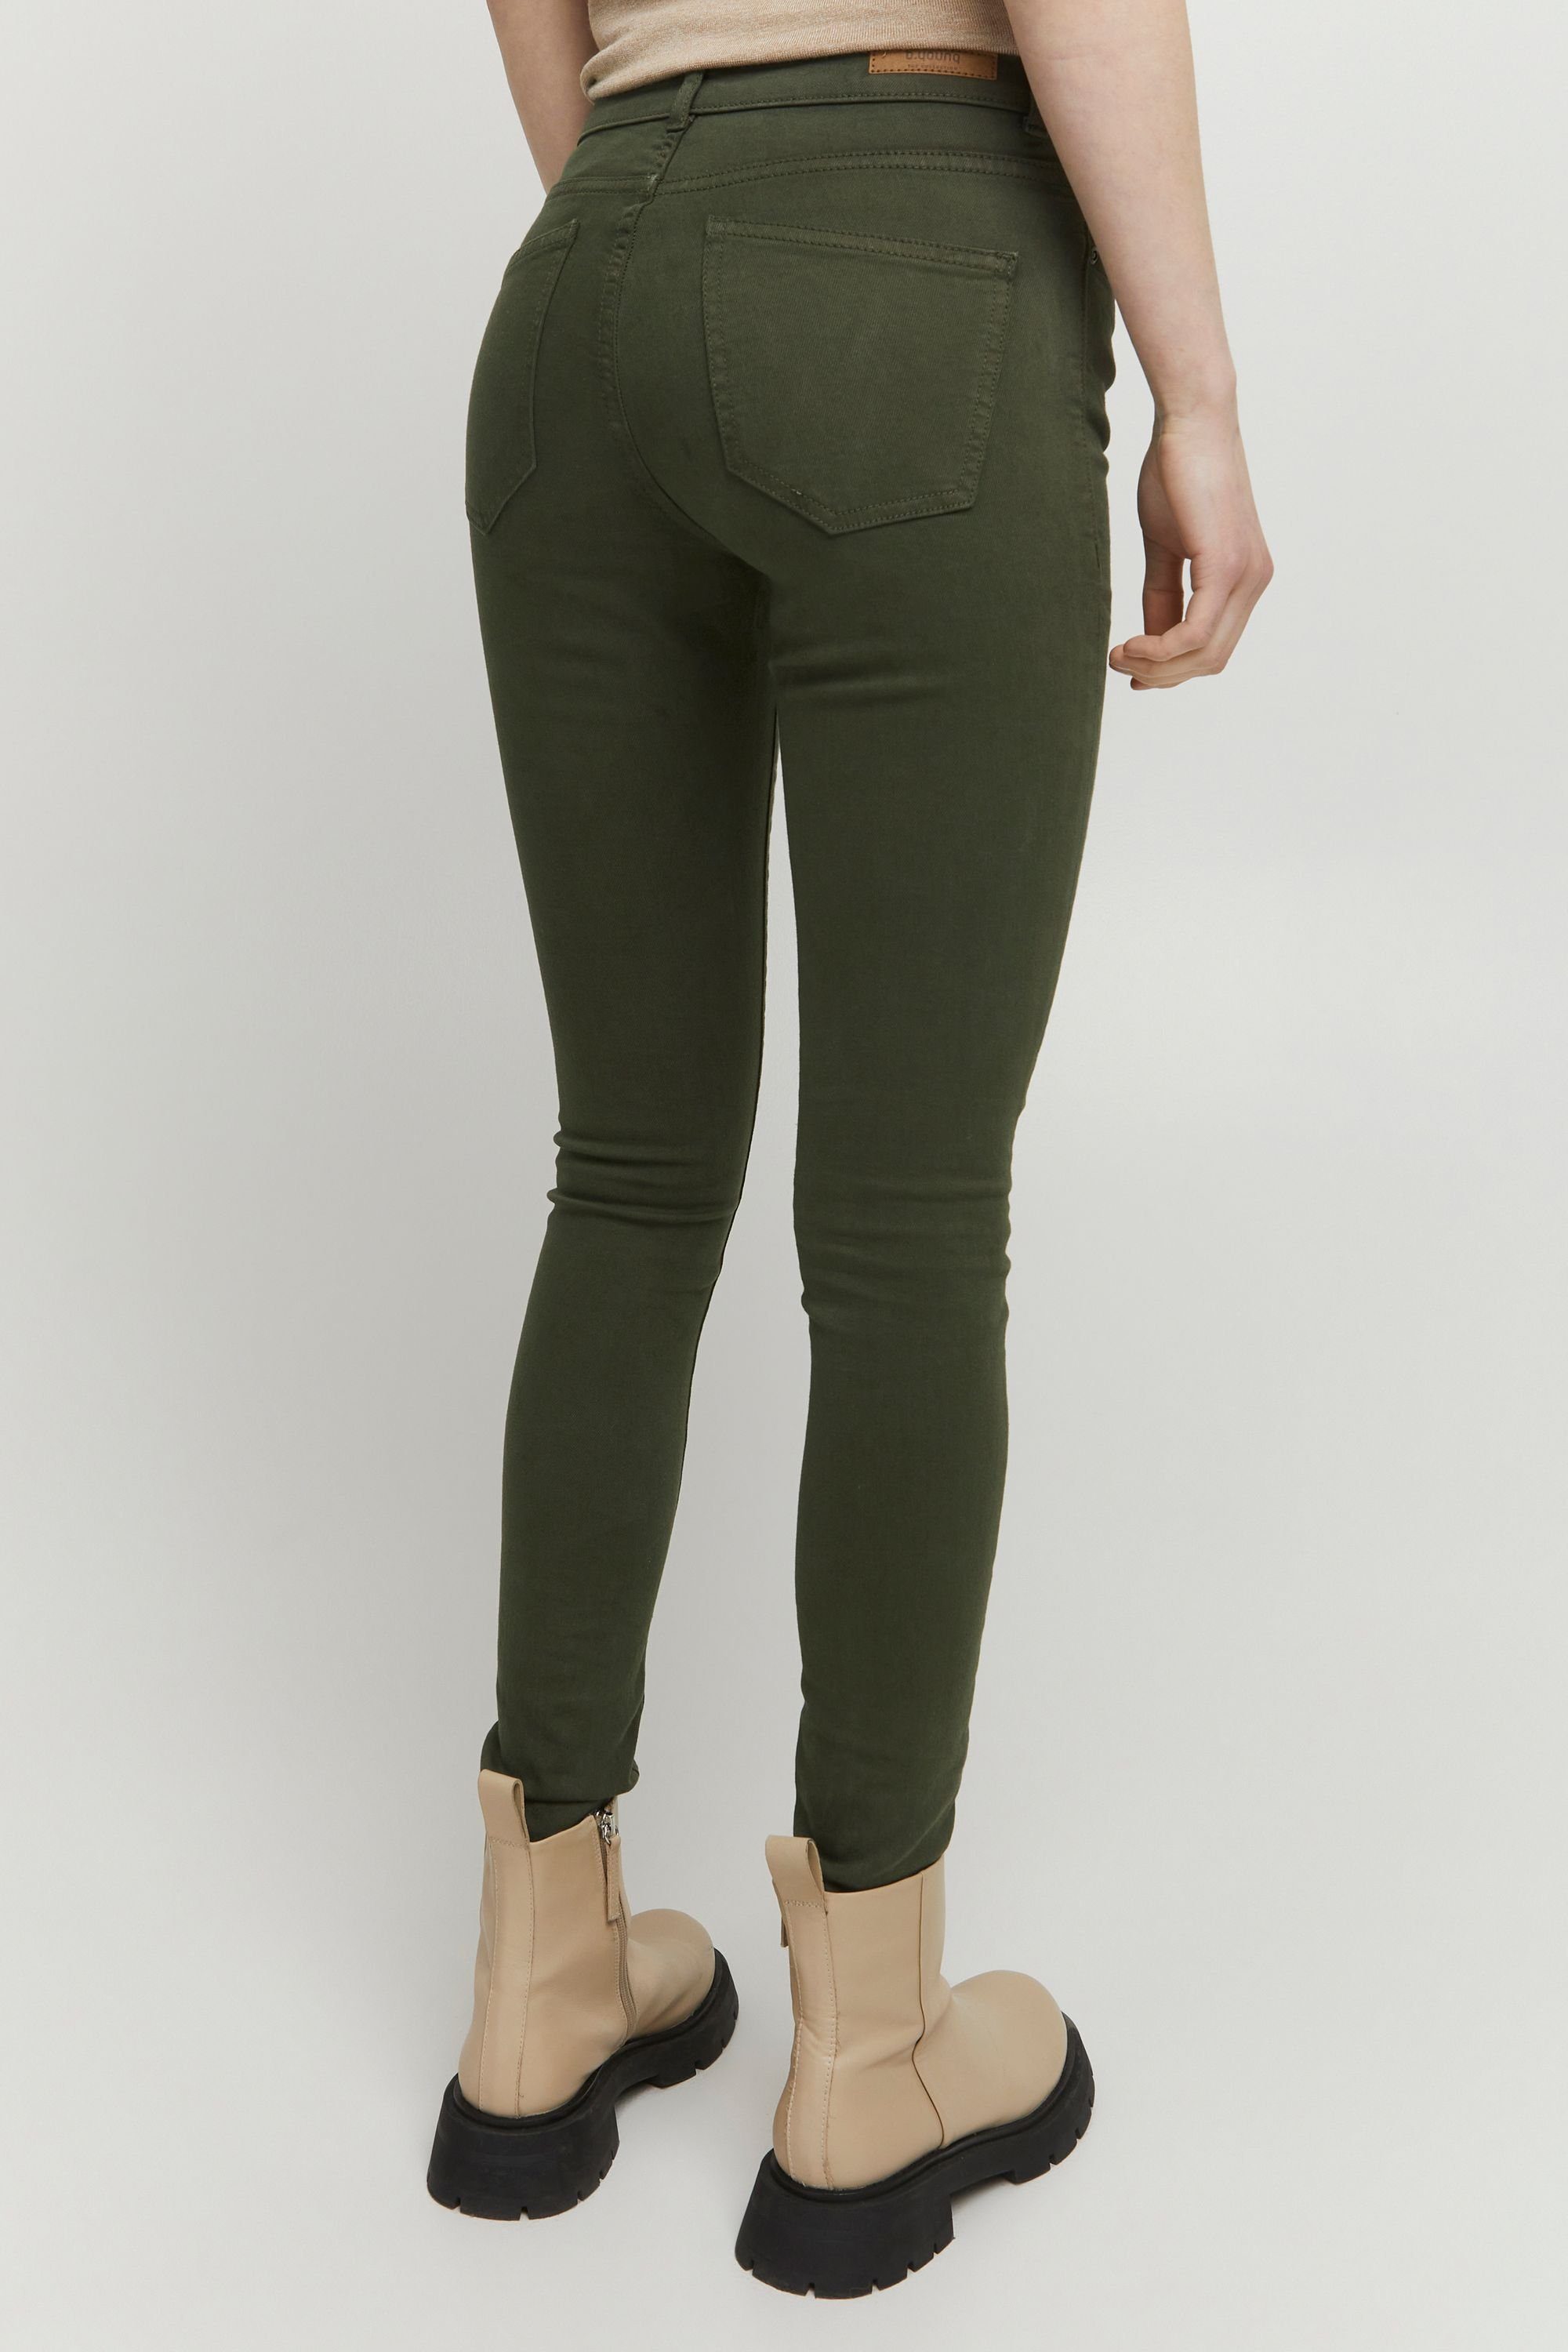 Skinny-fit-Jeans b.young Rosin BYLola 20803214 jeans (190509) - Luni